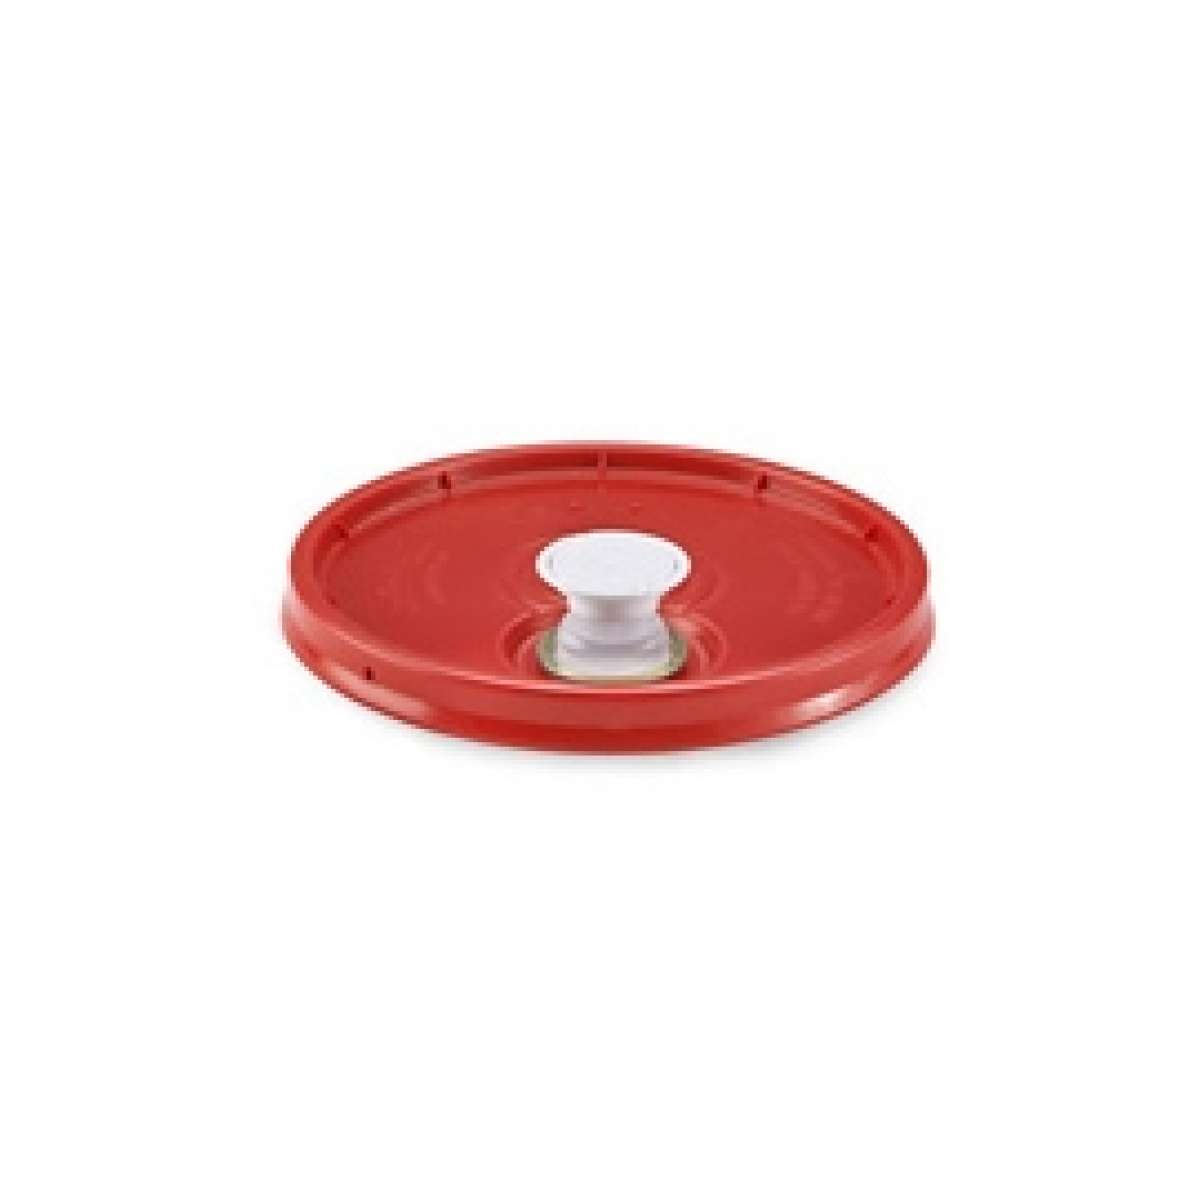 Lid with spout for 5 Gallon Pail - Red